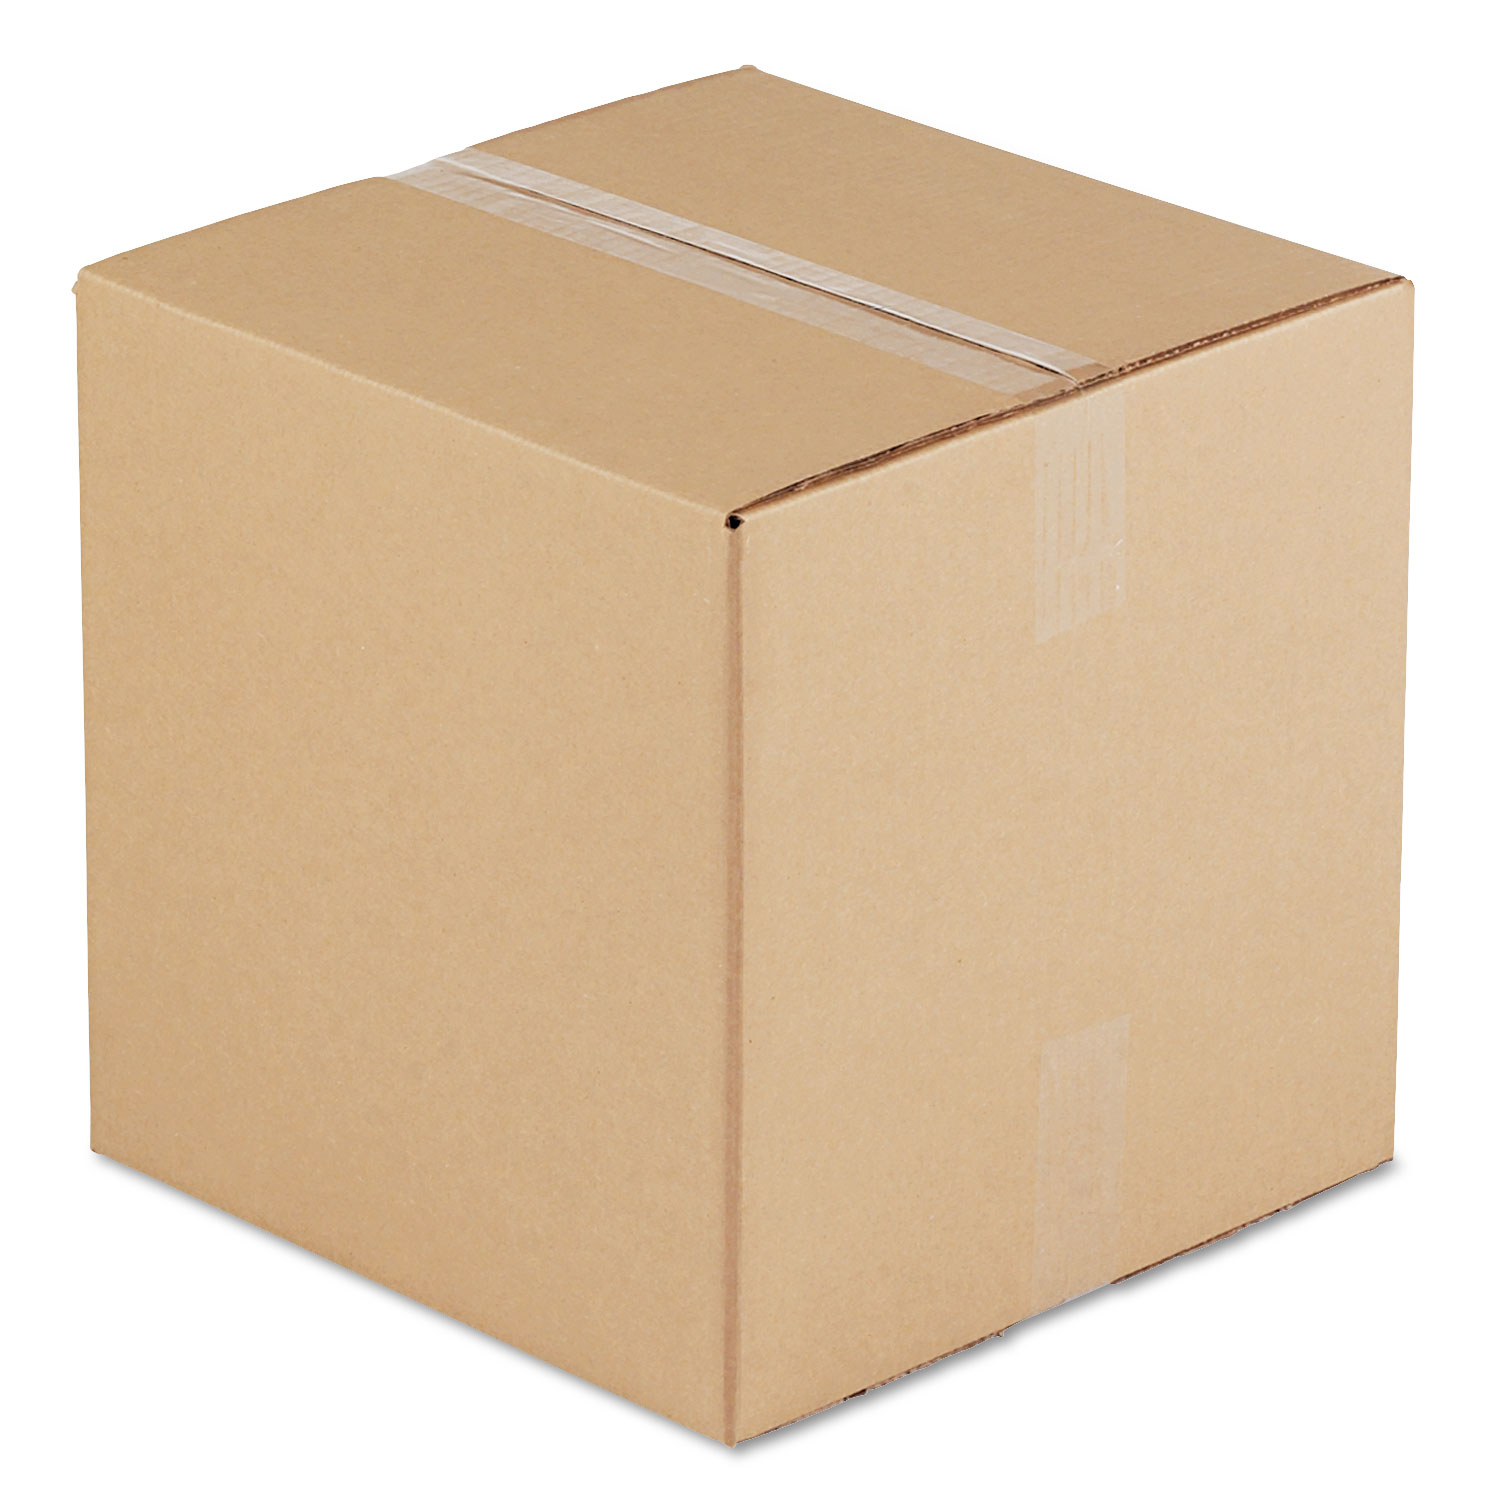 Brown Corrugated - Cubed Fixed-Depth Shipping Boxes, 14l x 14w x 14h, 25/Bundle